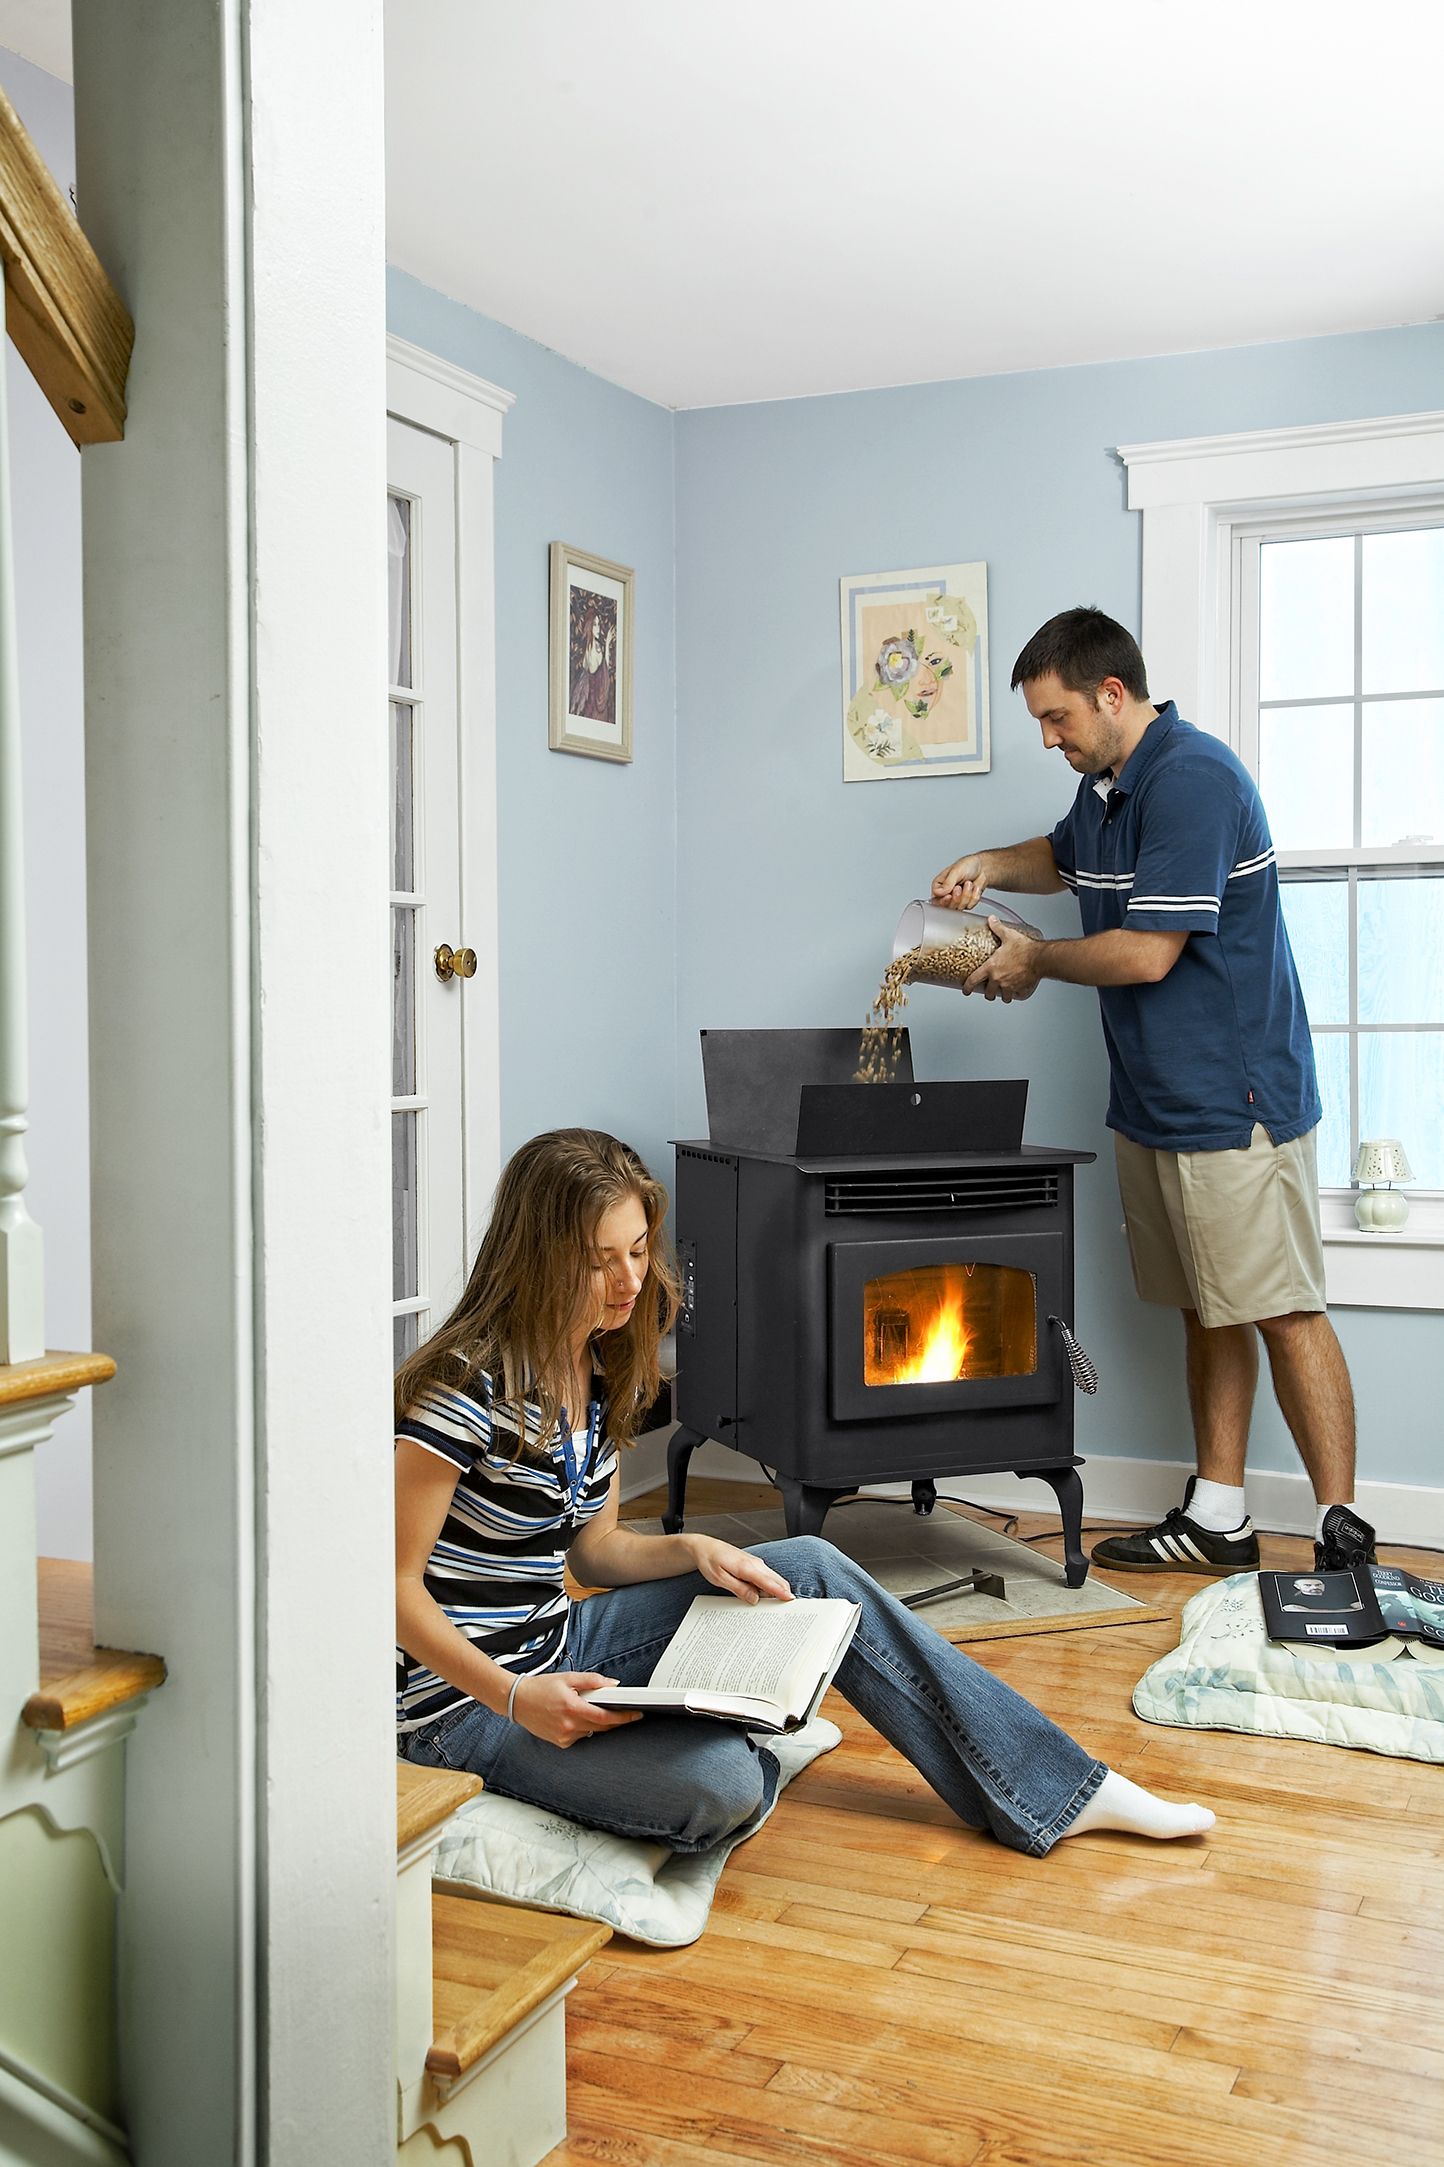 Pellet Stoves: Inserts, Freestanding Stoves, Costs & More - This Old House